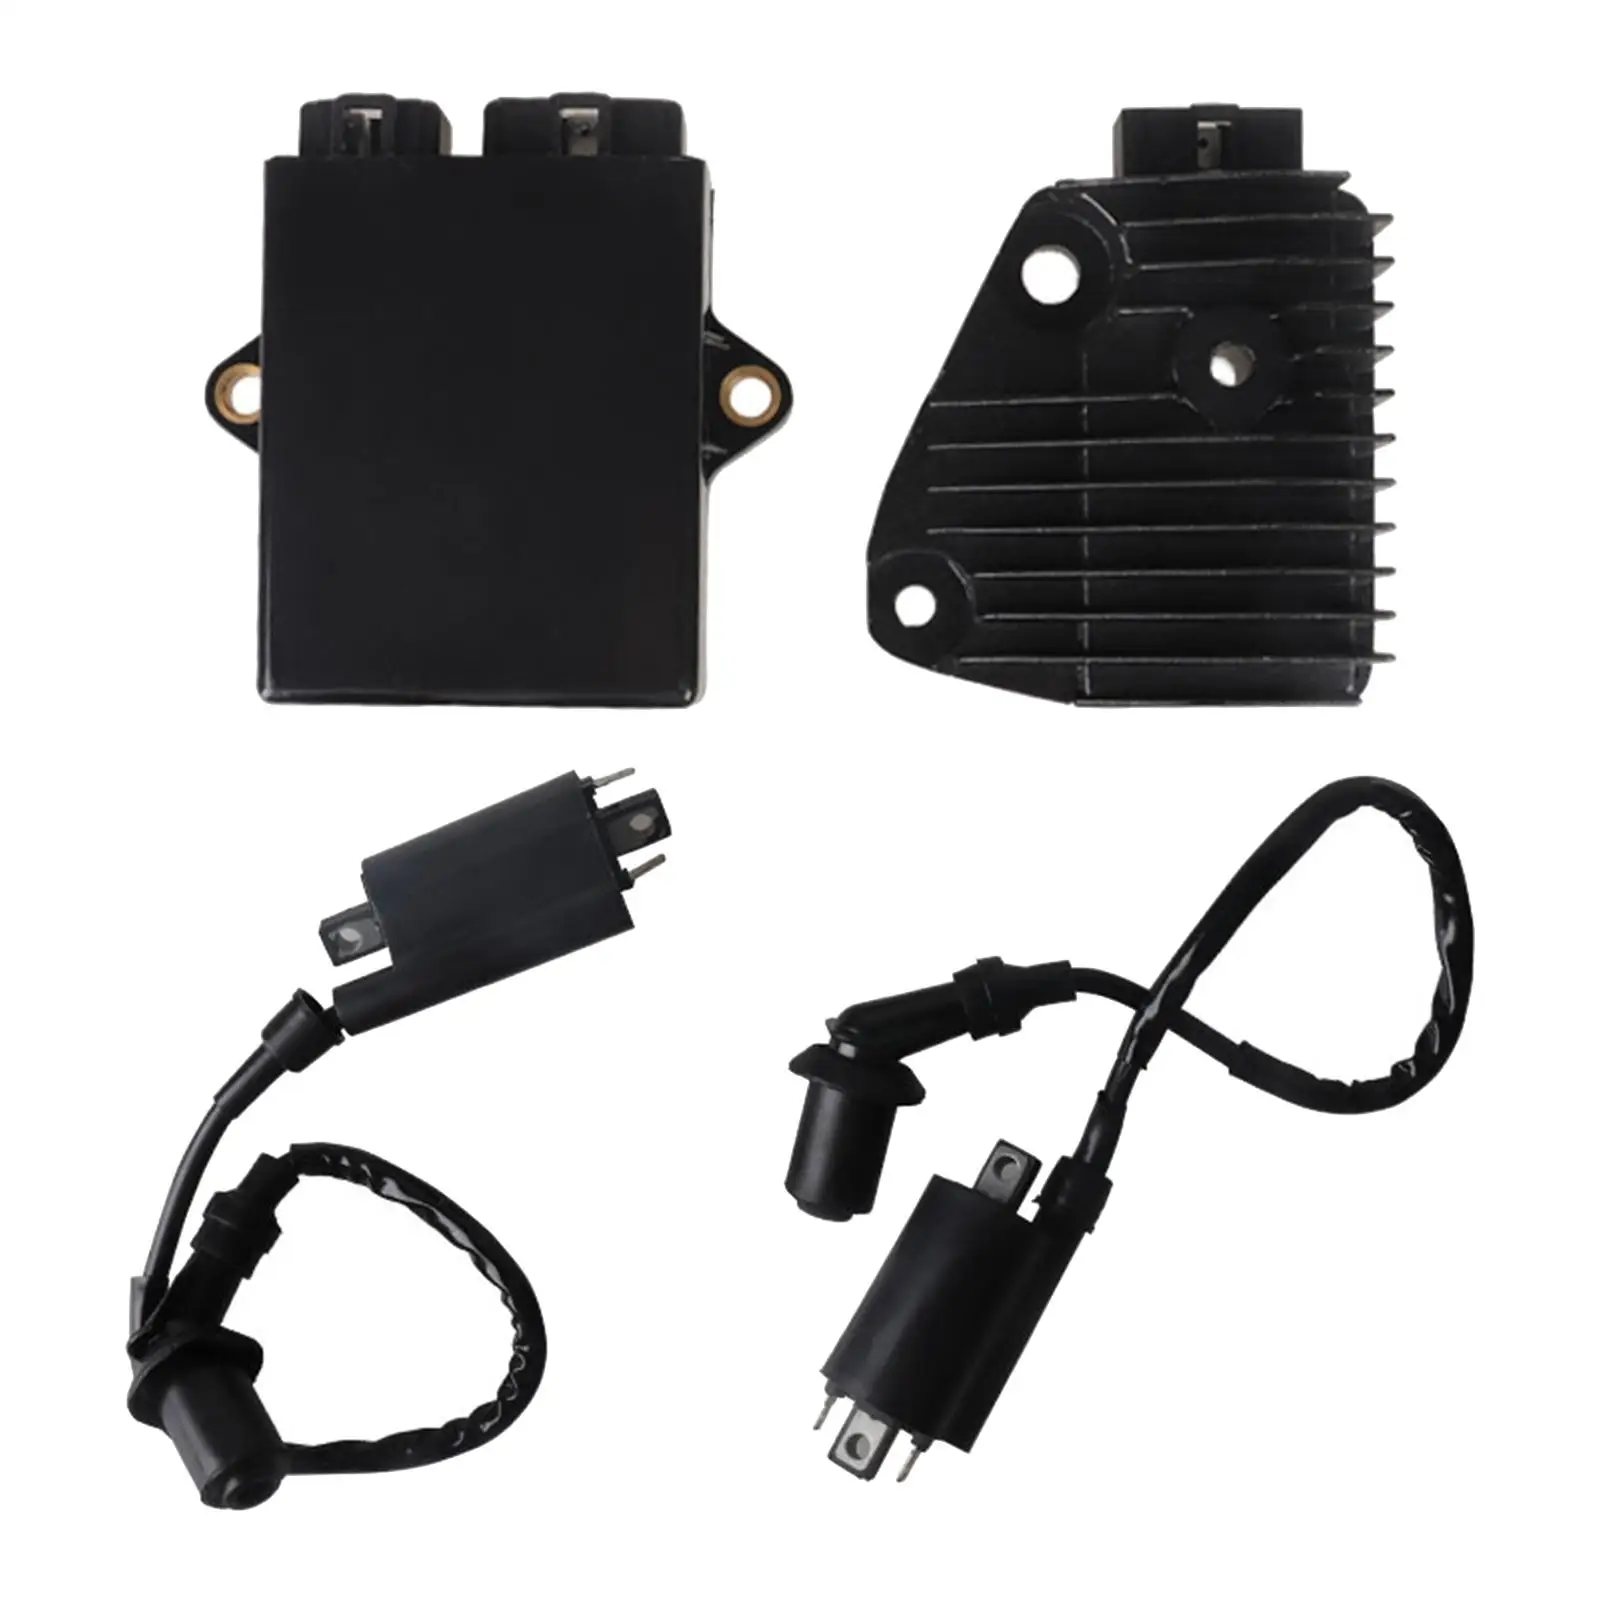 Cdi Ignition Coil Regulator Replaces, Durable, Premium ,High Performance Motorcycles Accessories for XV250 Route 66 V-star 250